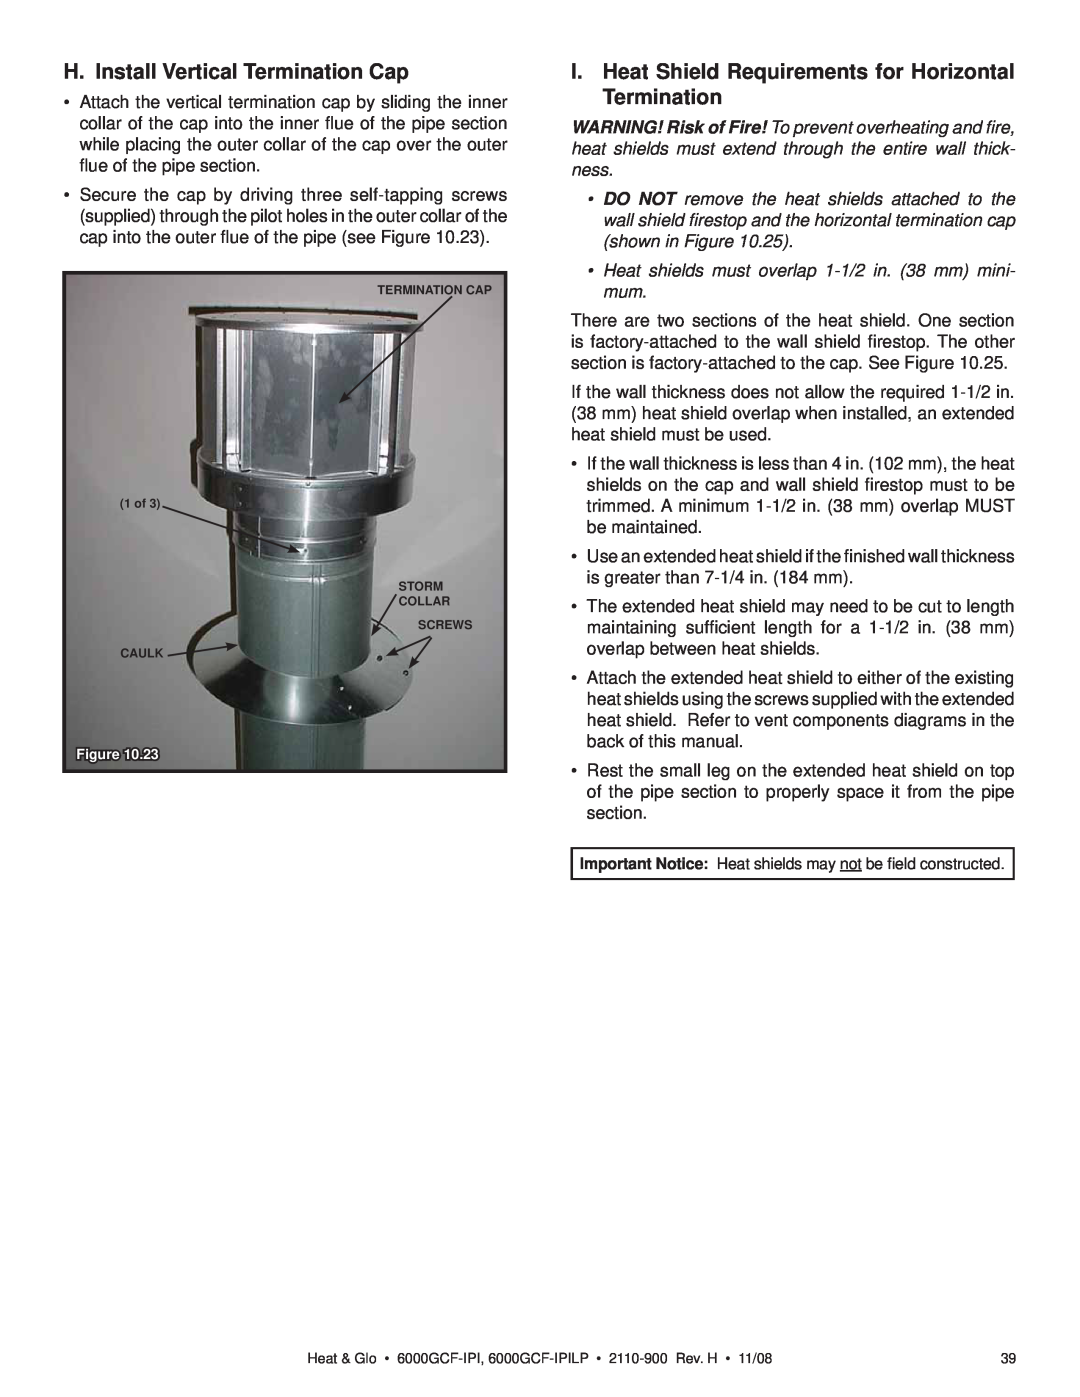 Hearth and Home Technologies 6000GCF-IPIL owner manual H. Install Vertical Termination Cap 